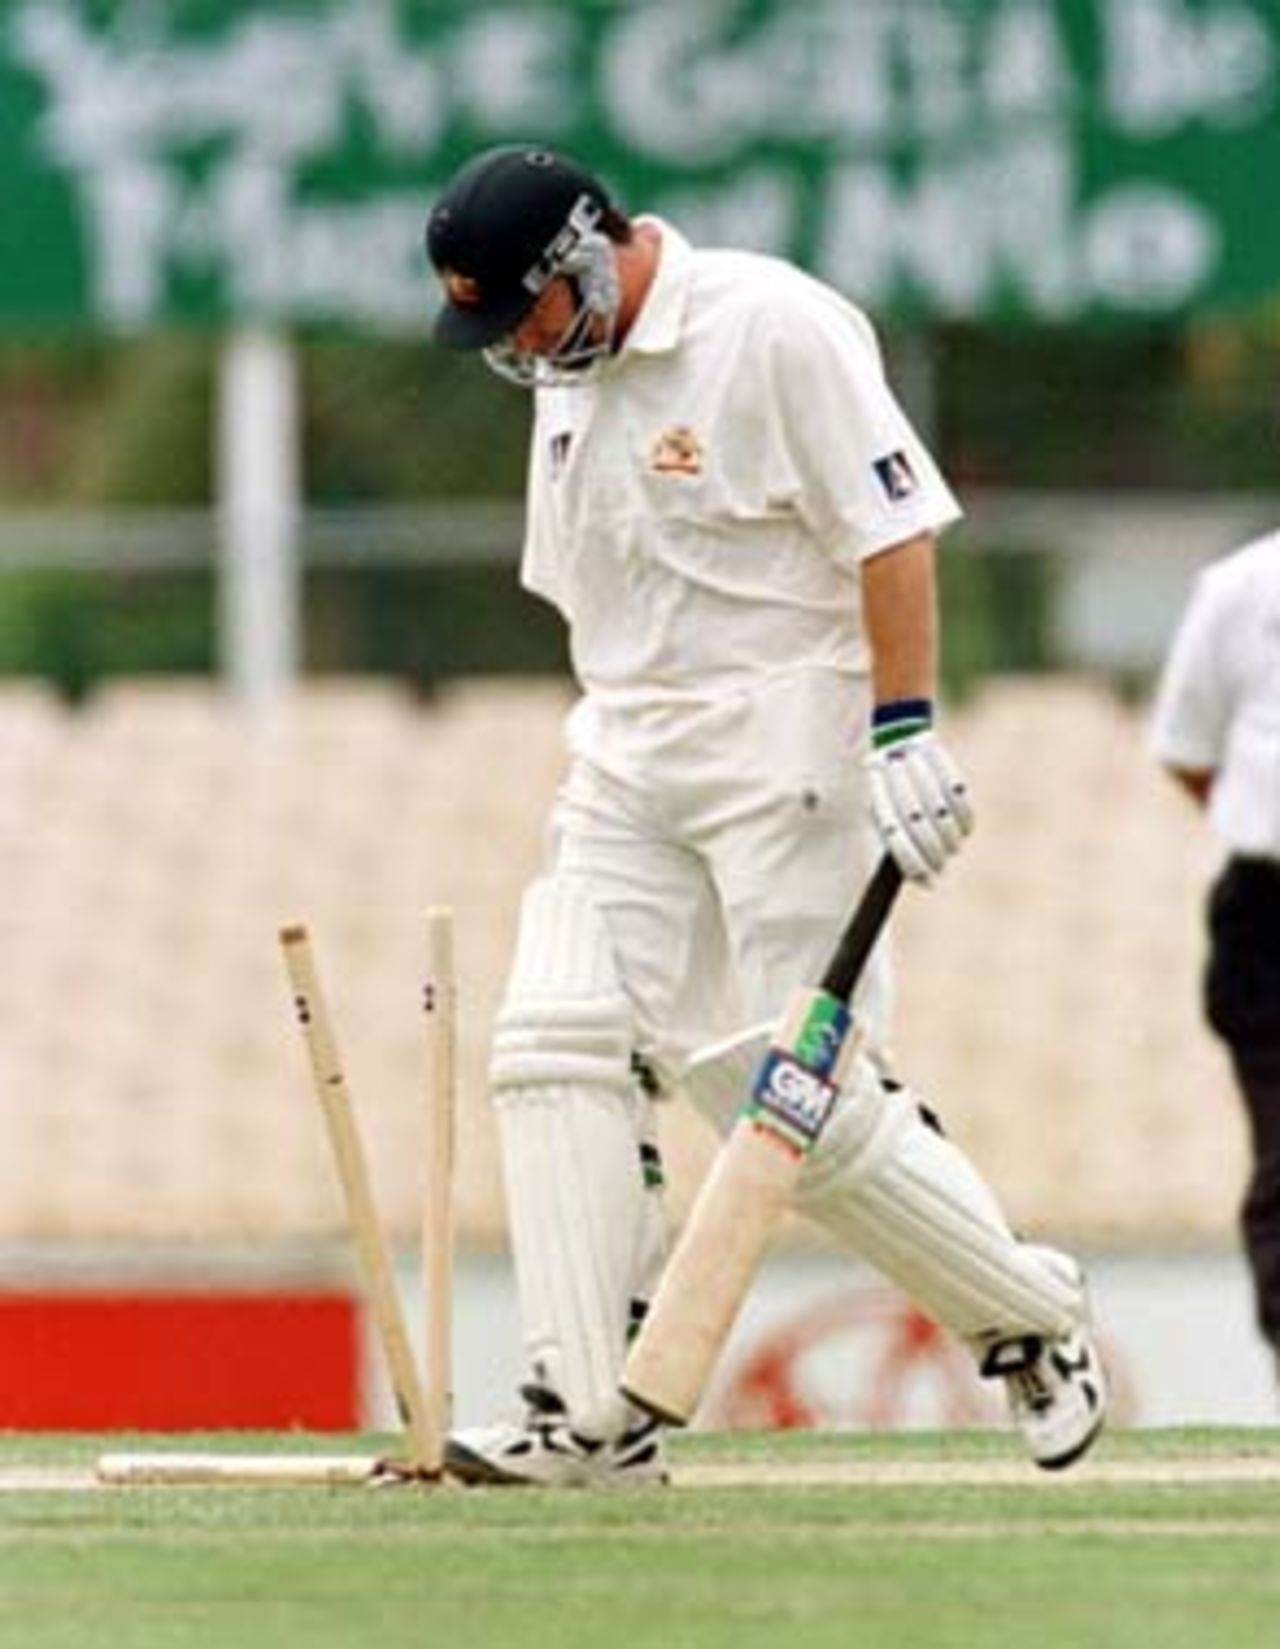 A distrught Steve Waugh walks off past his shattered stumps after being bowled just 4 short of his century, bowled by O'Connor. Australia v New Zealand 2nd Test, Day Three, at the WACA, Perth, Thursday November 22nd 1997